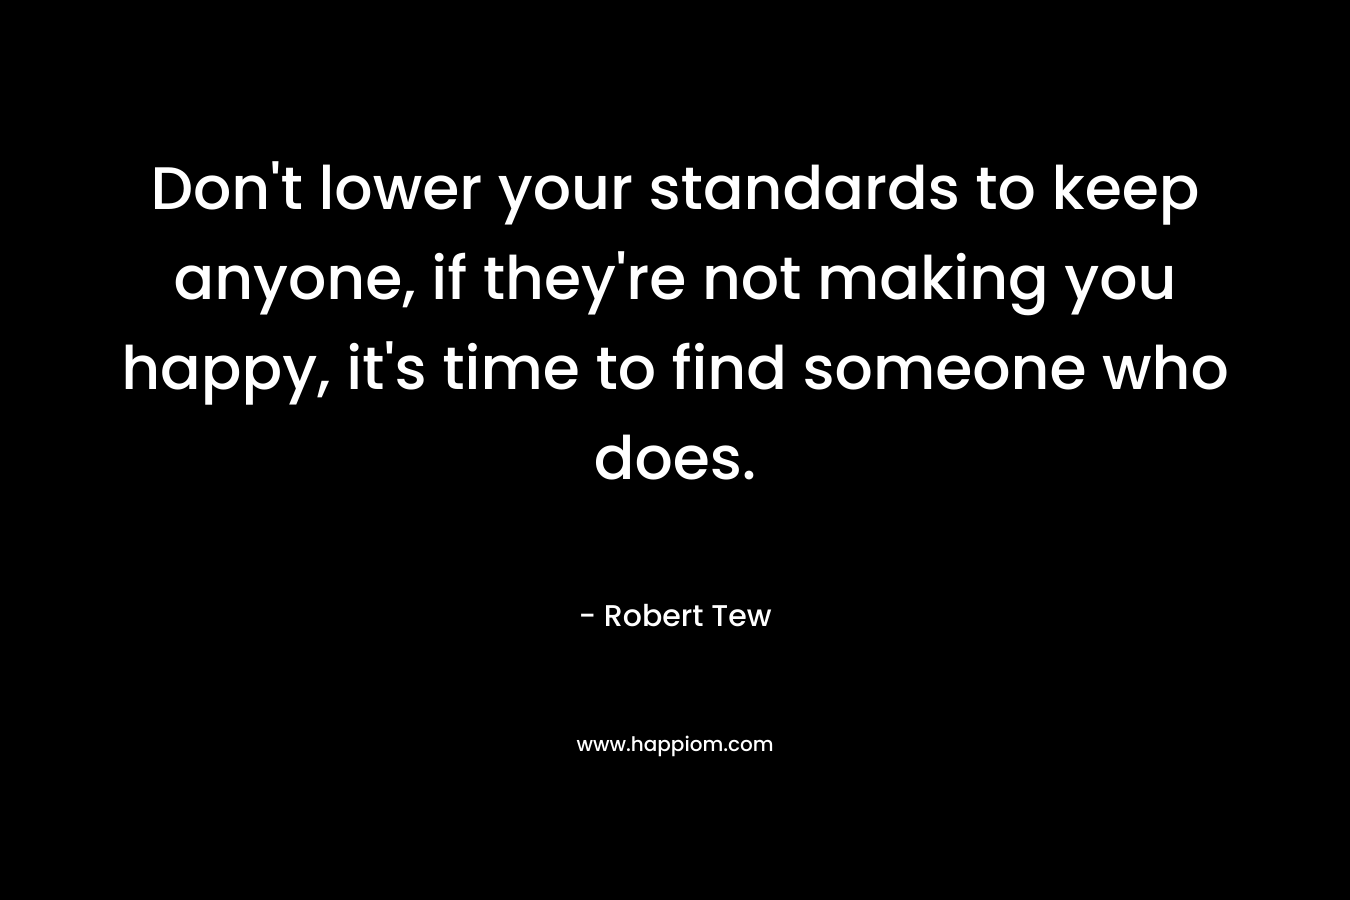 Don't lower your standards to keep anyone, if they're not making you happy, it's time to find someone who does.